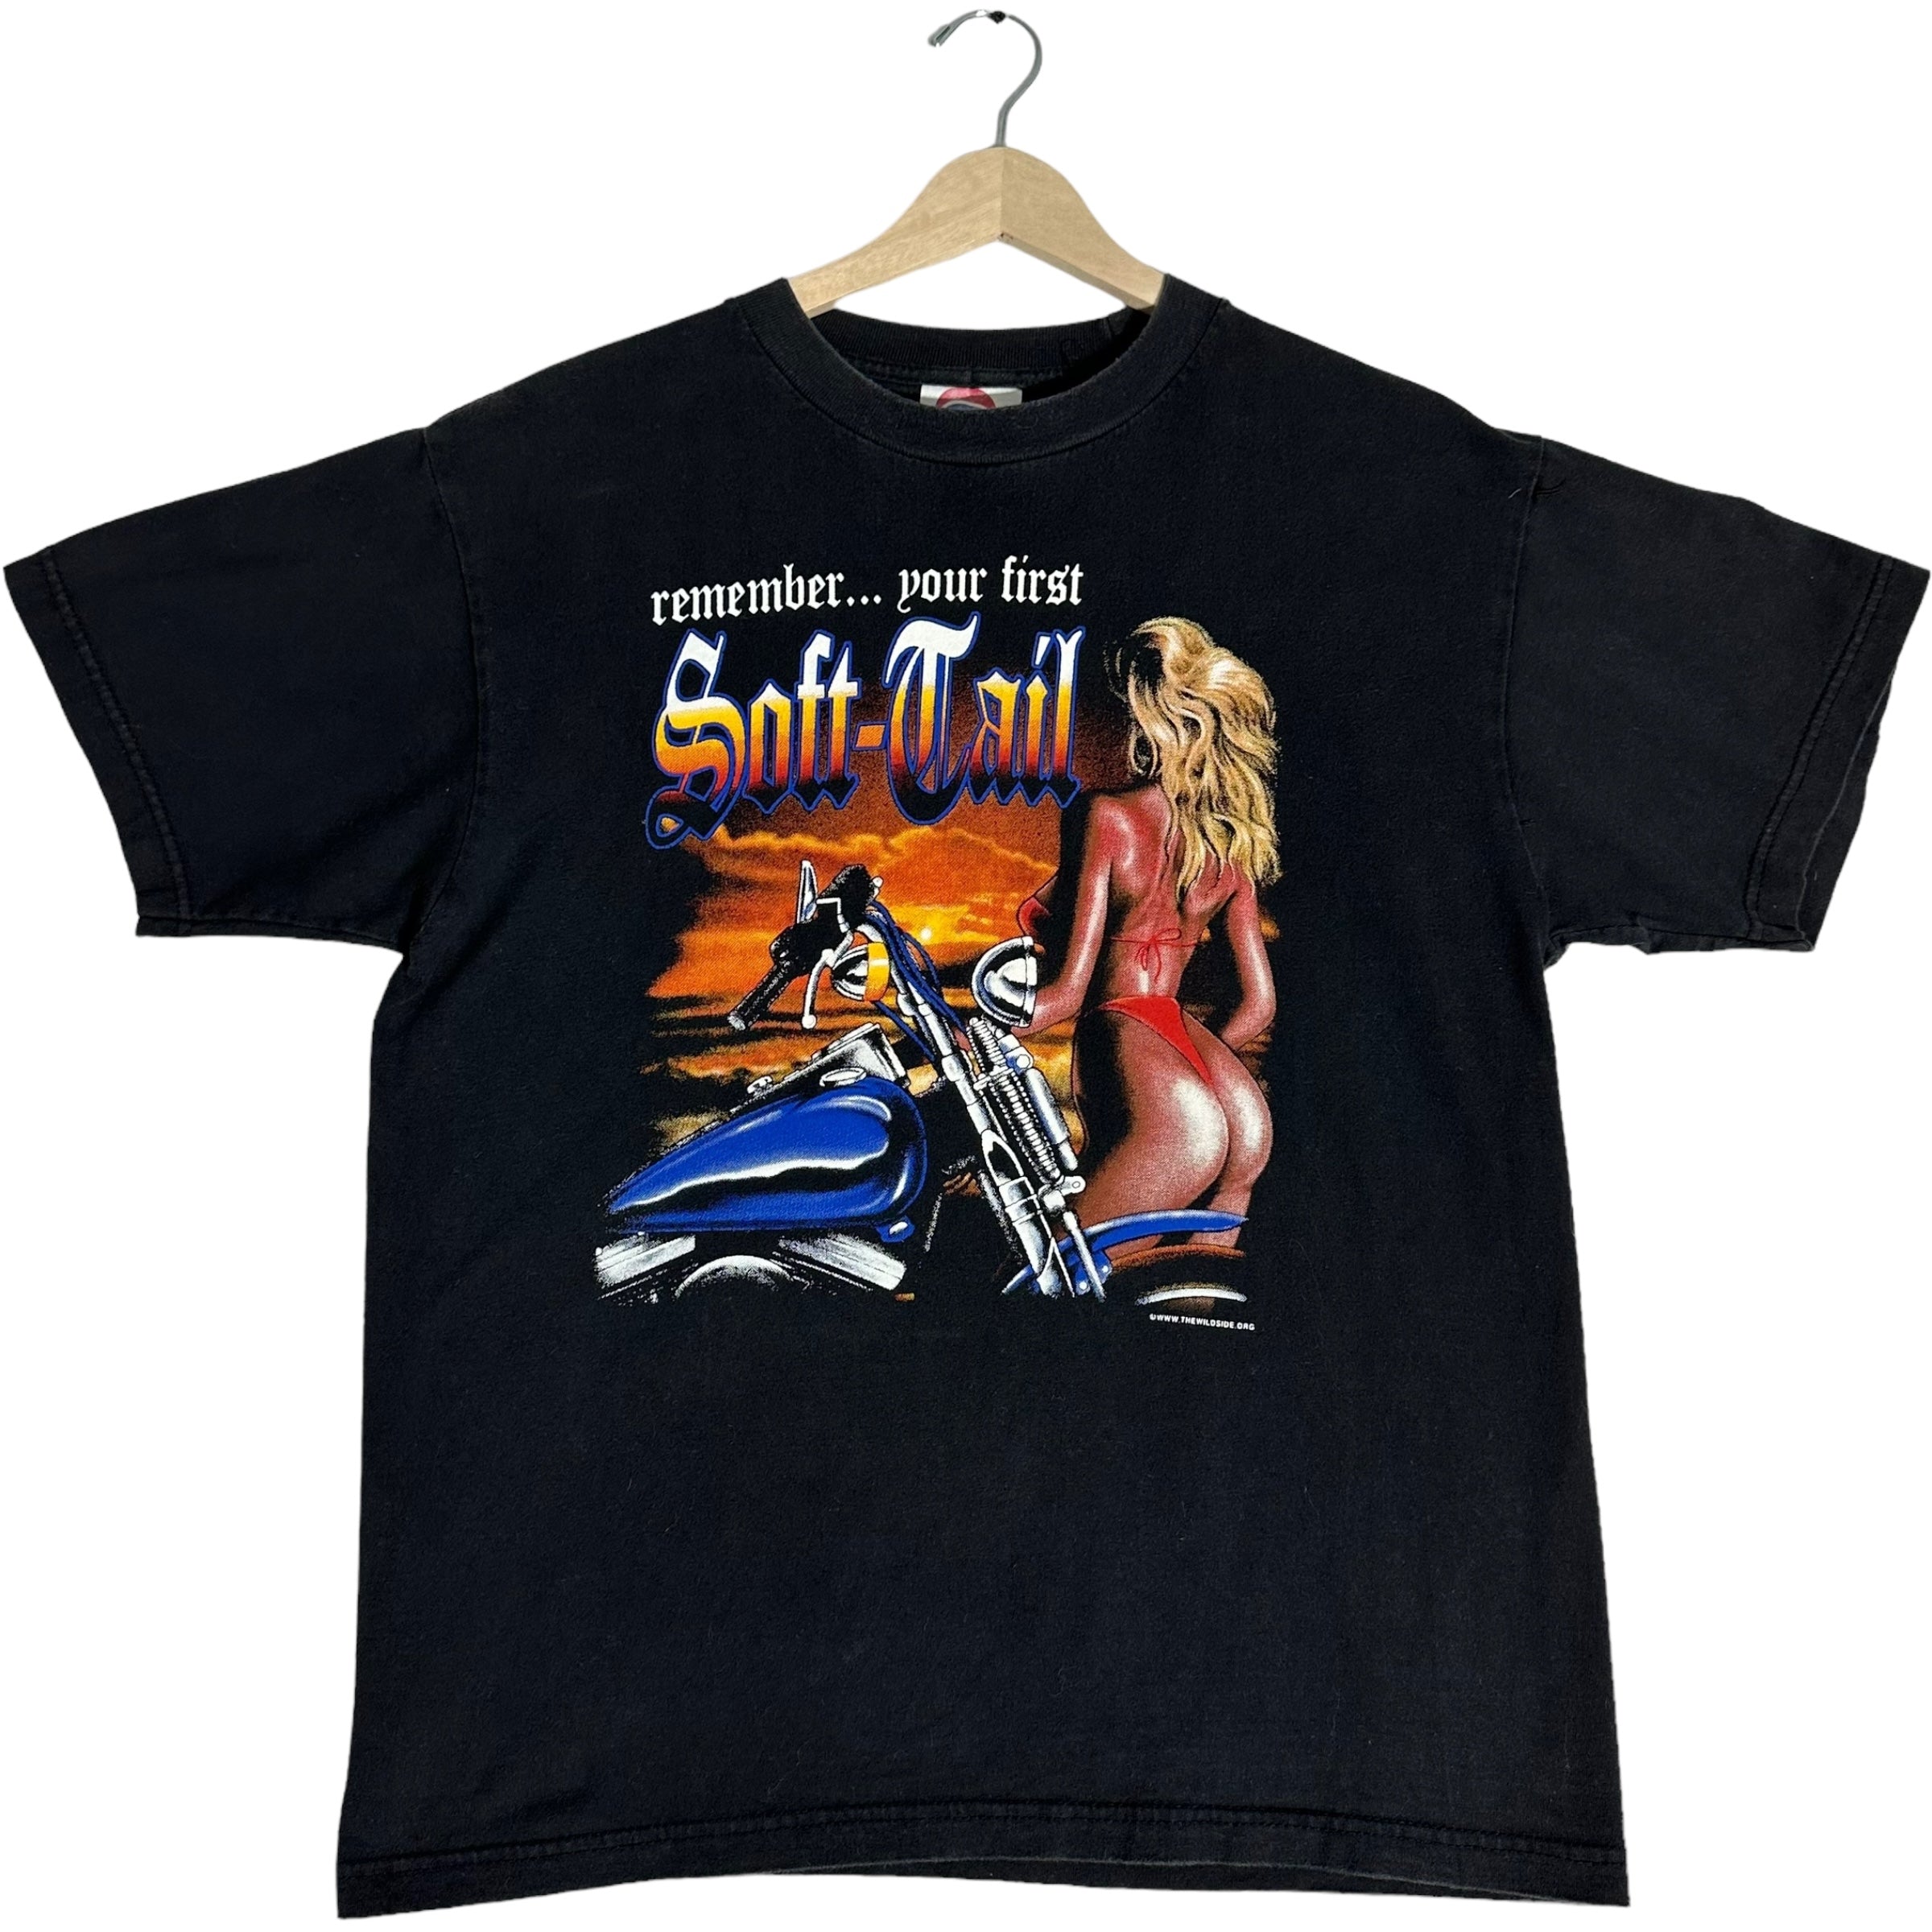 Vintage "Remember Your First Soft Tail" Pinup Biker Tee